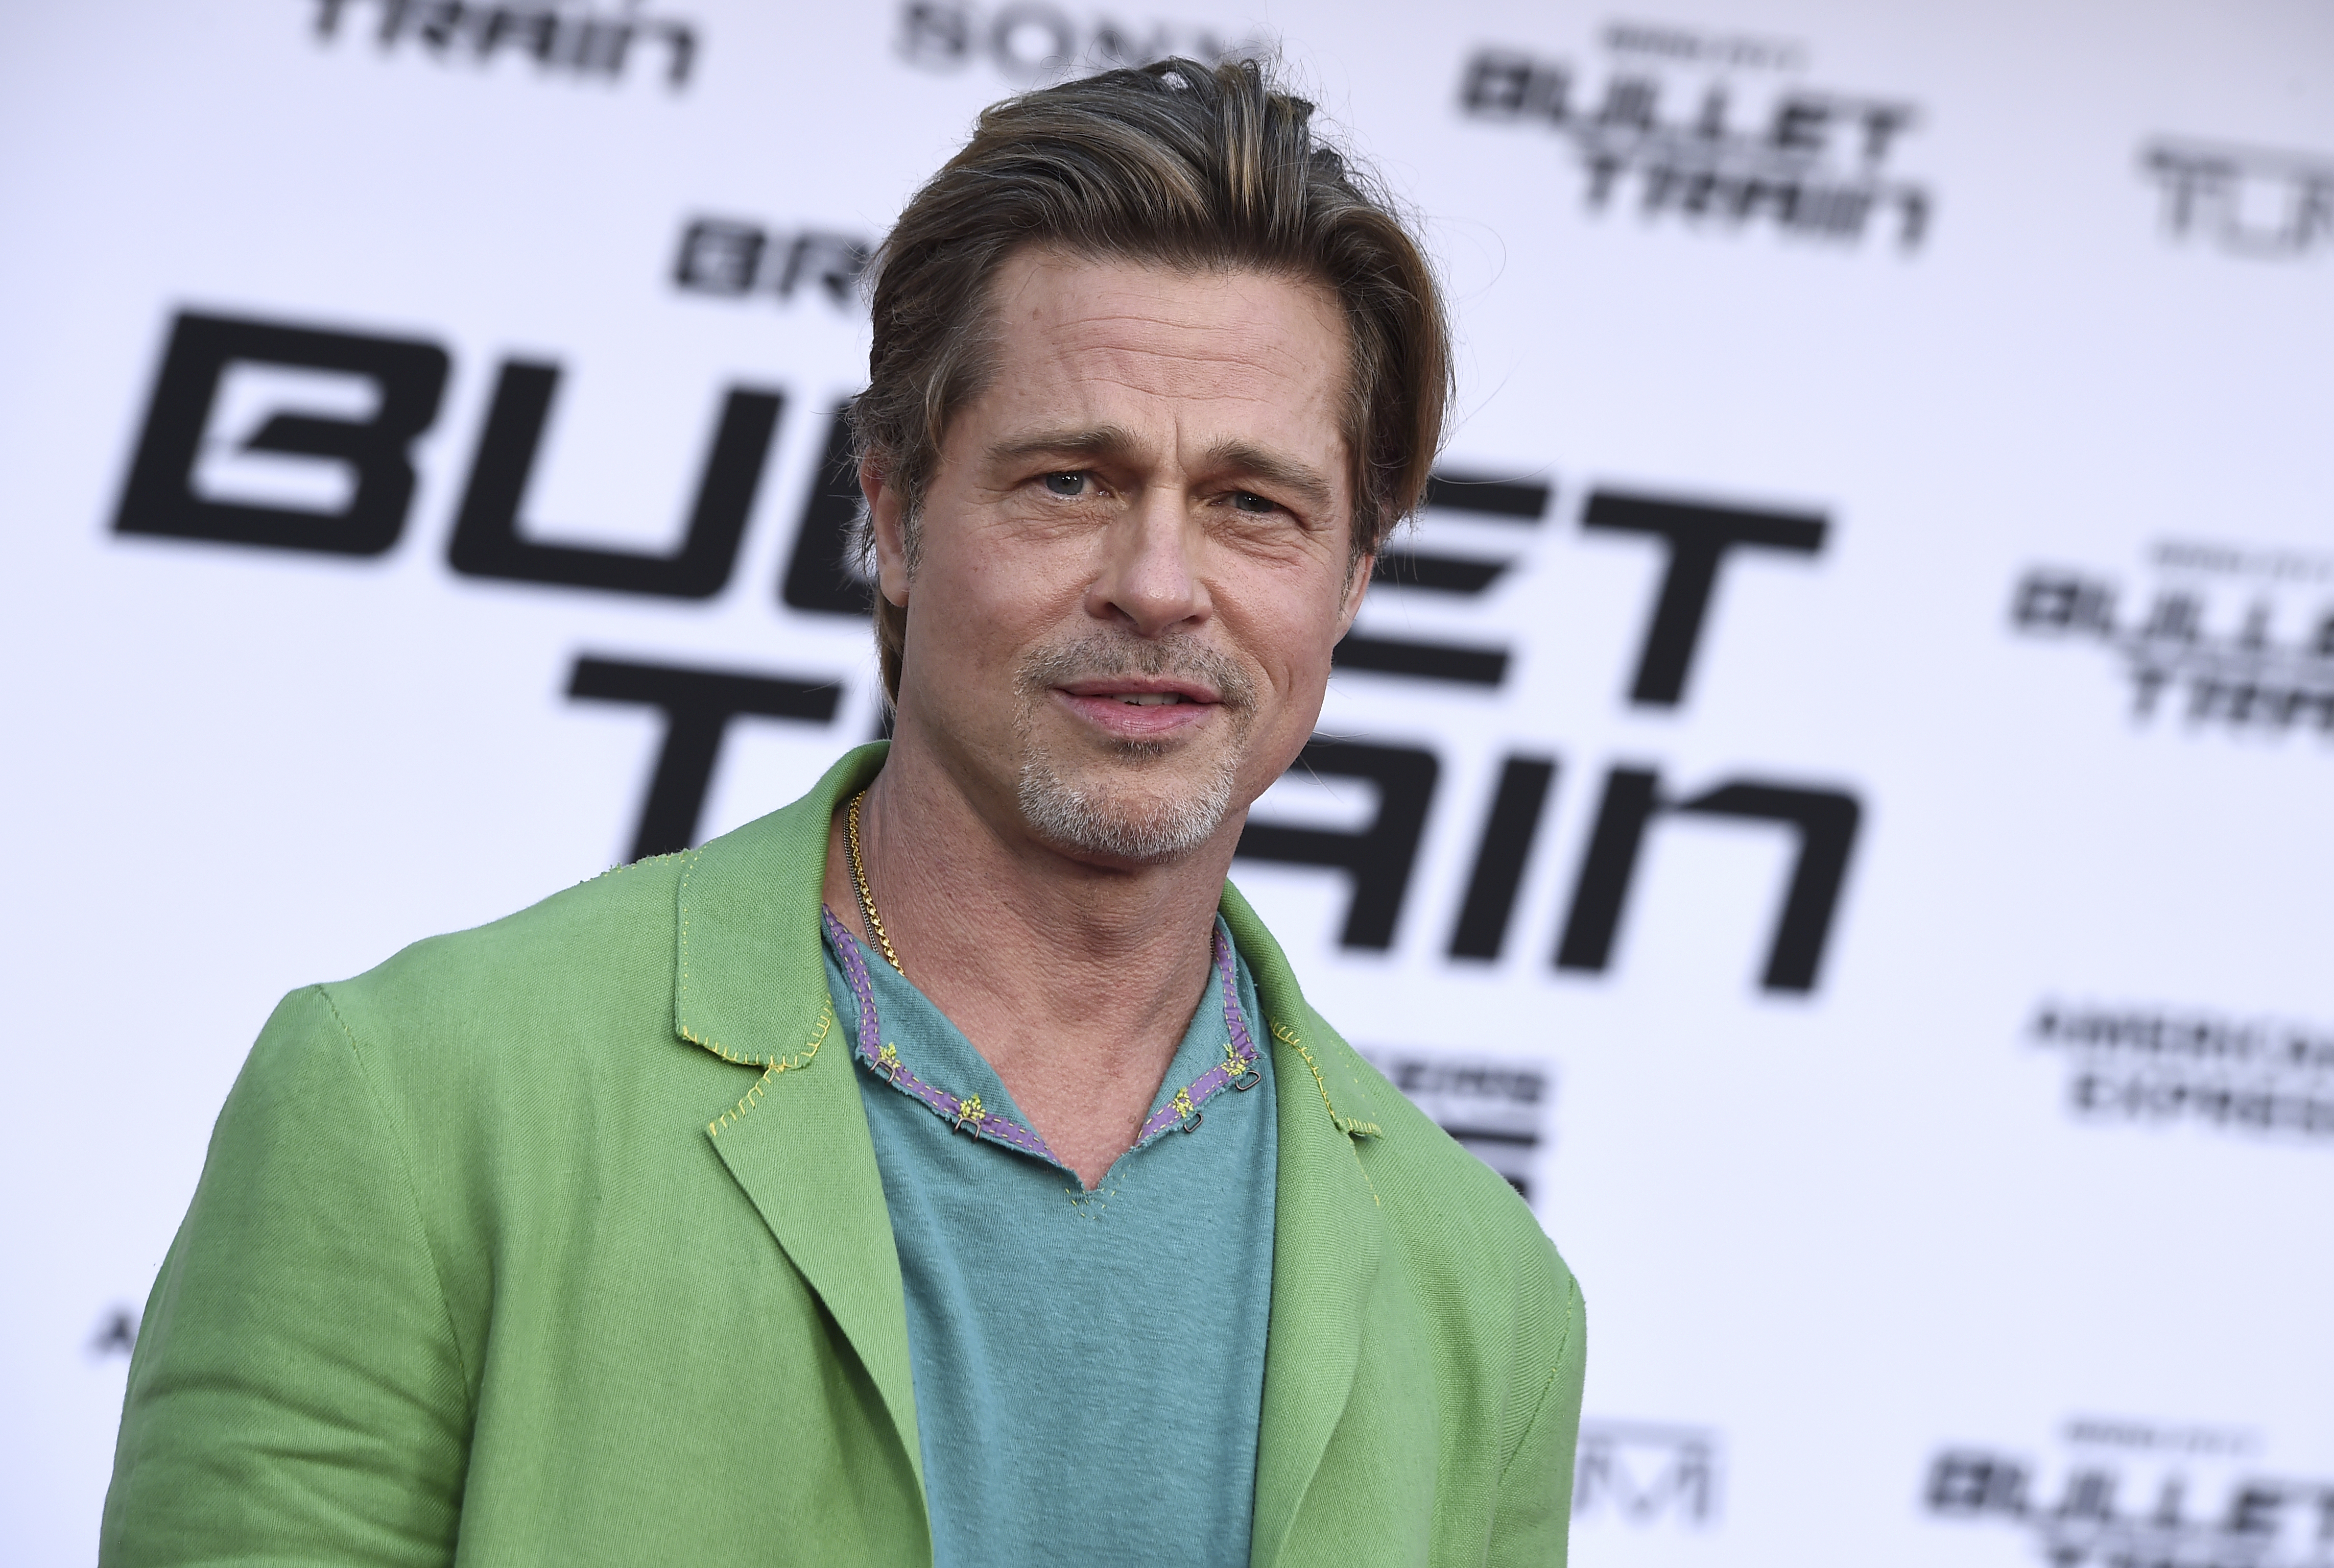 The Curious Case of Brad Pitt, Château Miraval, and a Compelling